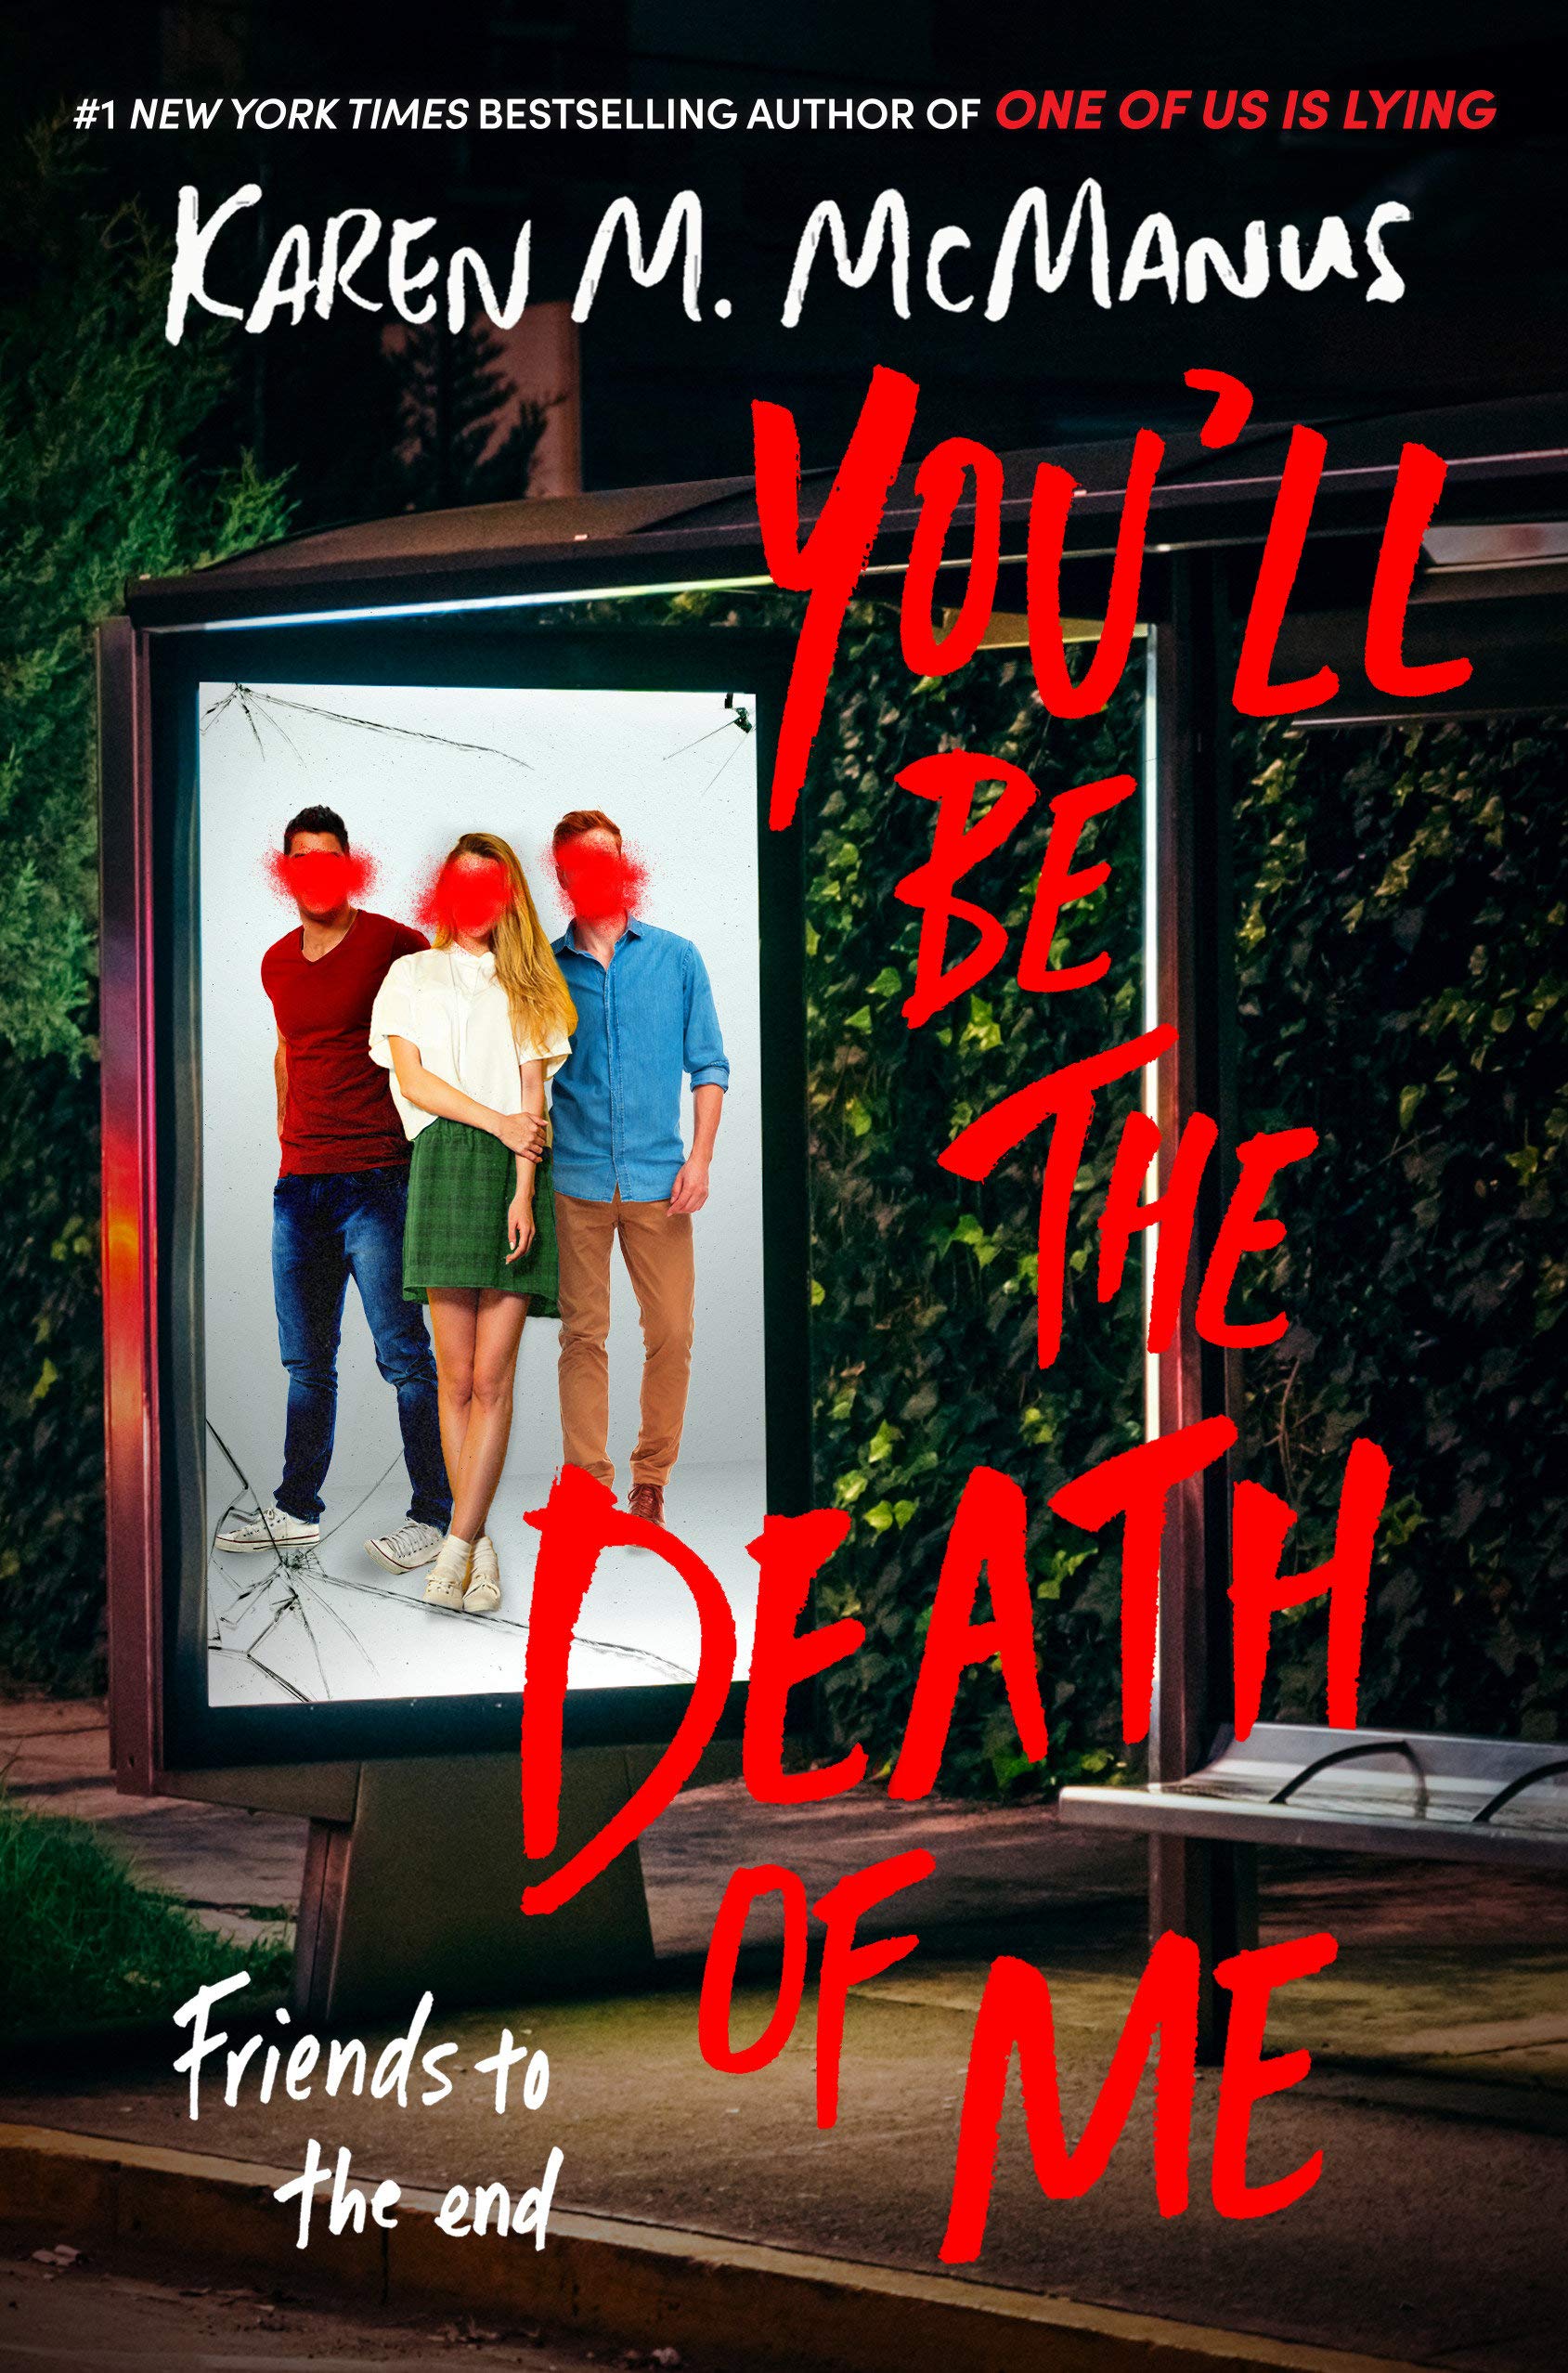 You'll Be the Death of Me Hardcover by Karen M. McManus